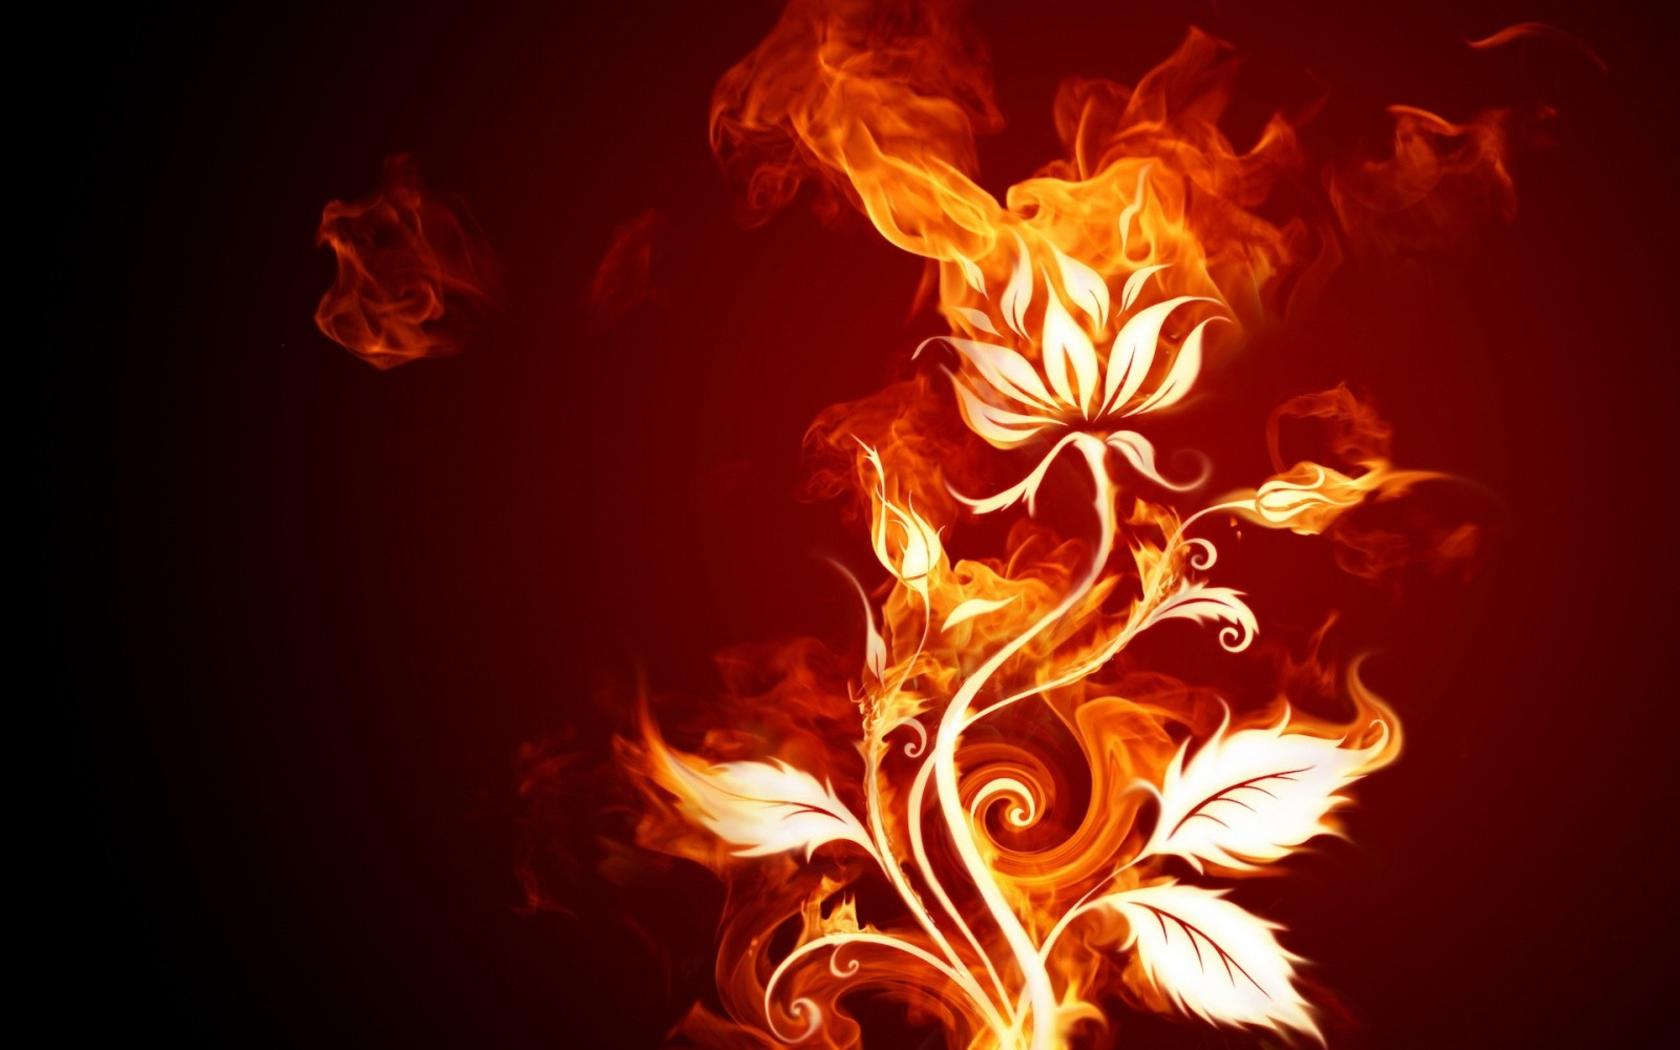 Fire Flower Wide Image Abstract 3d